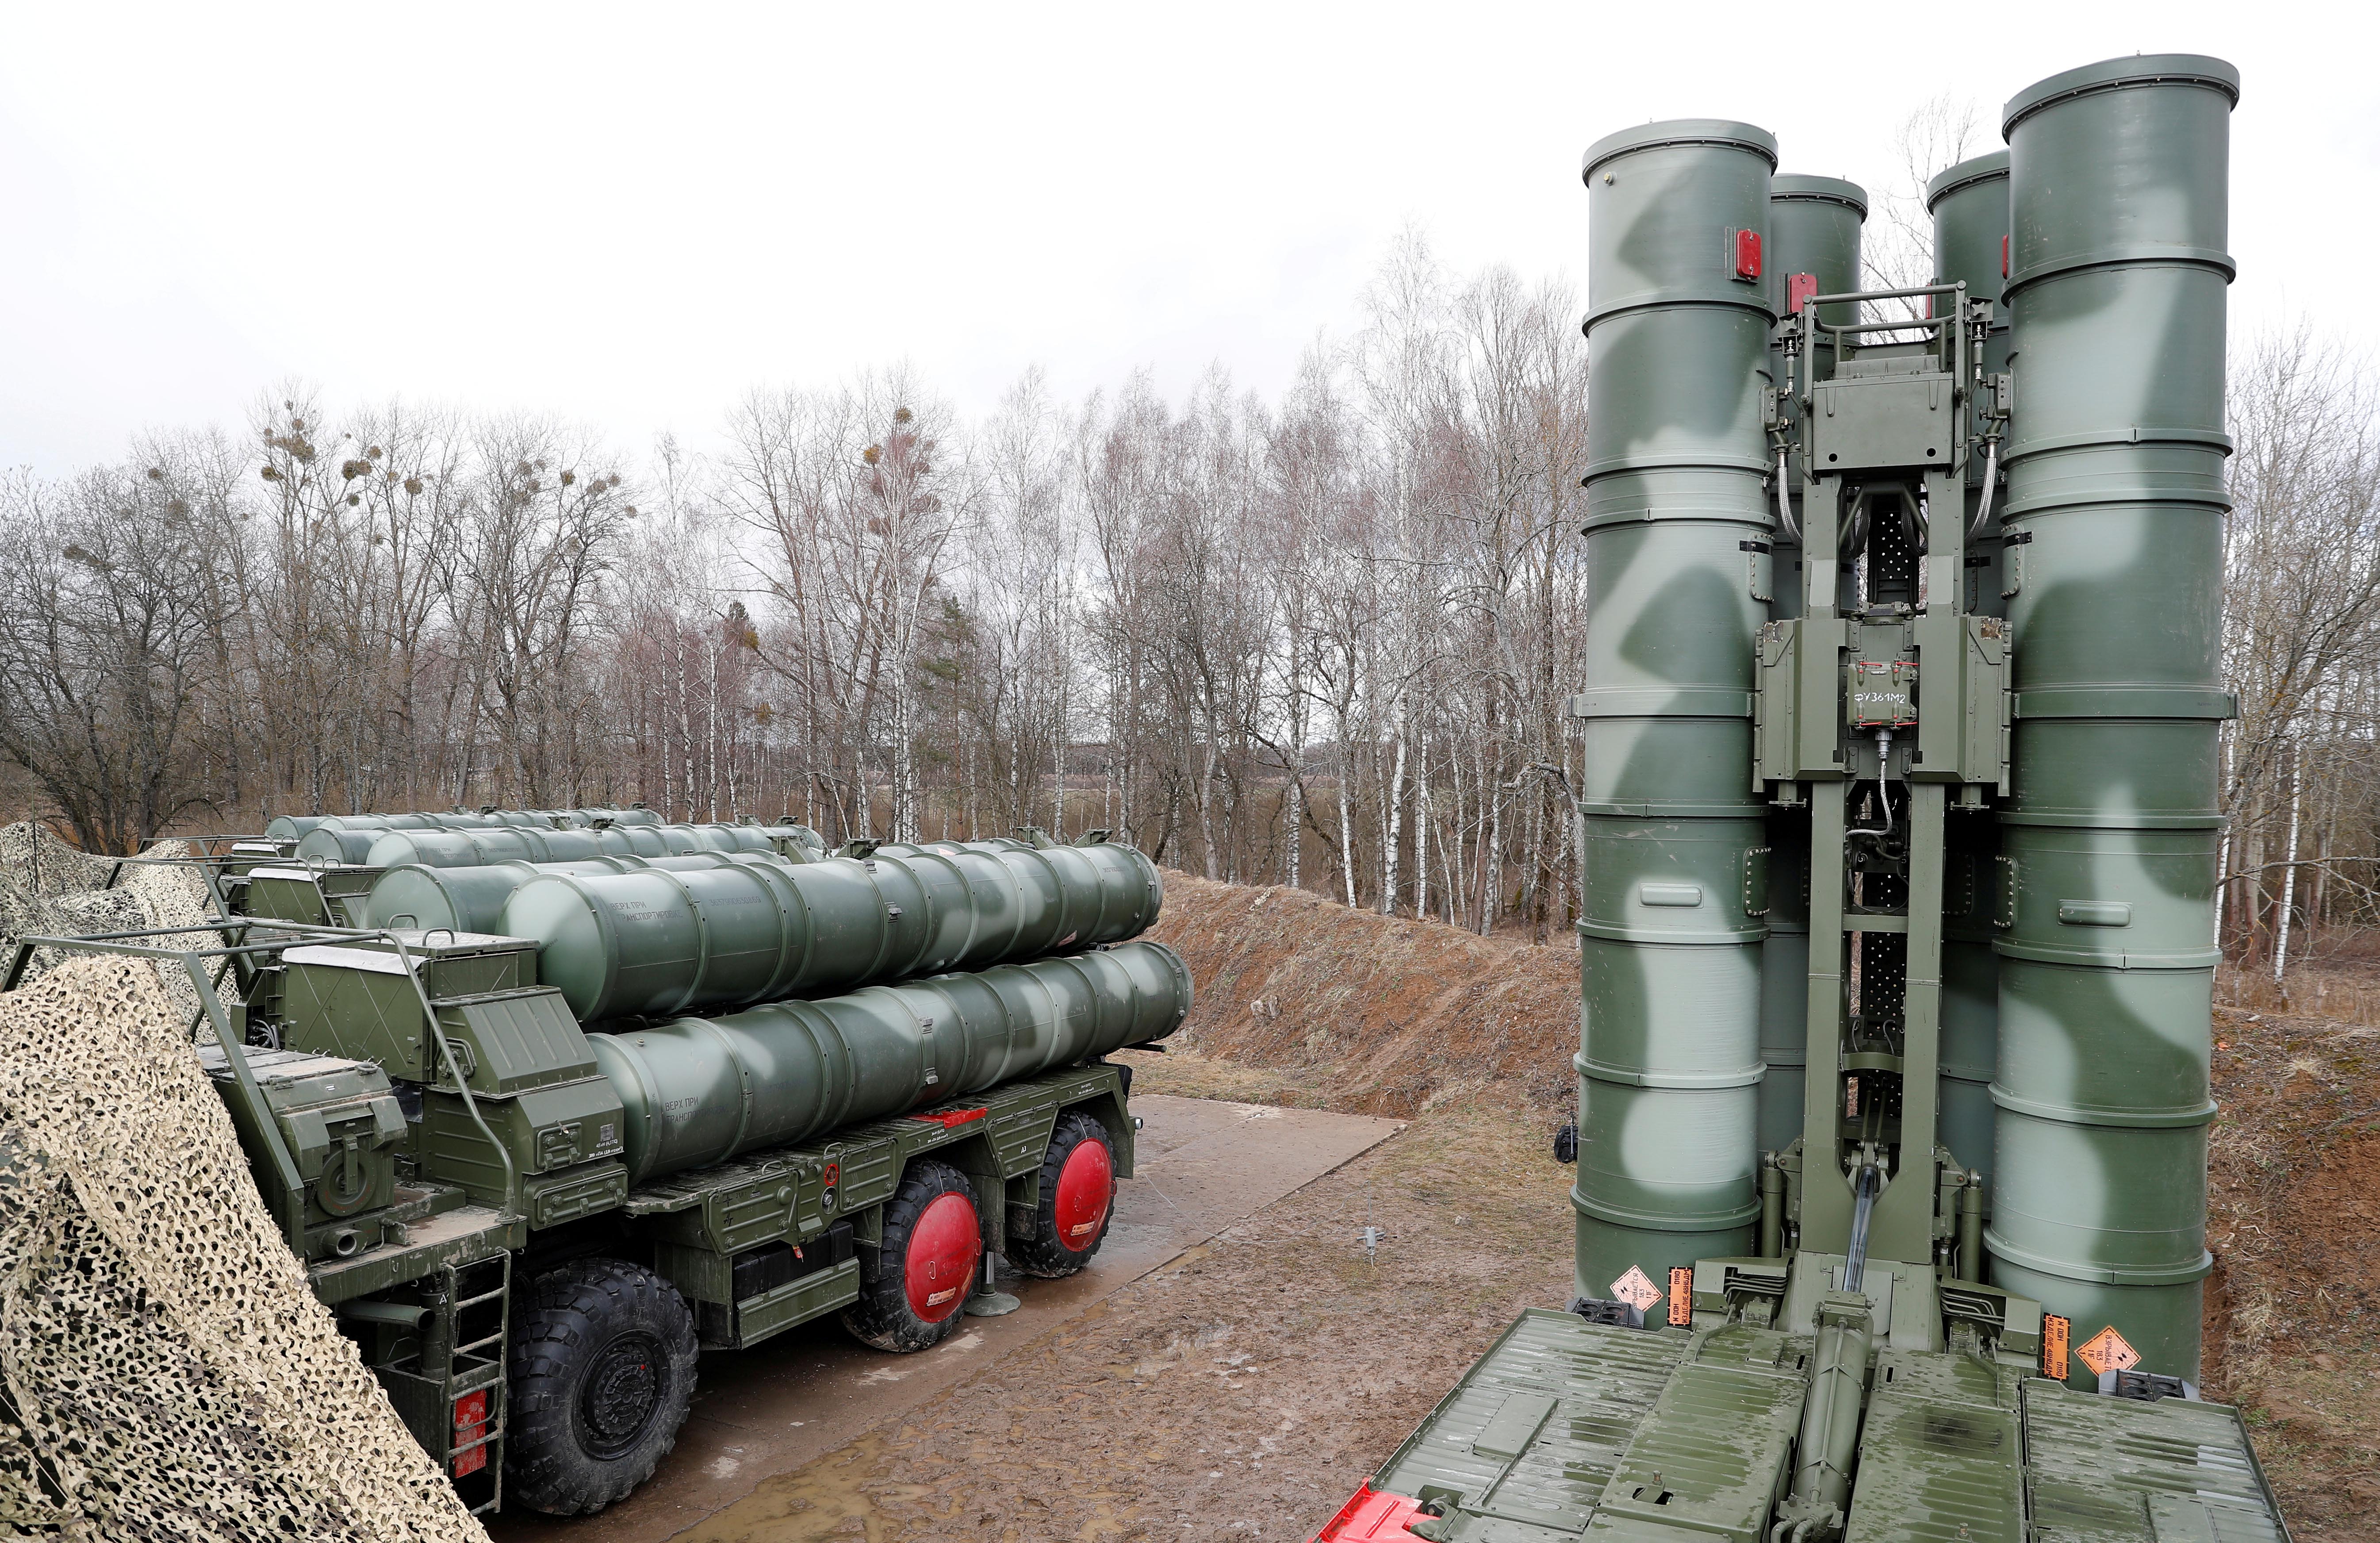 Despite US pressure, Russia begins delivery of second regiment of S-400 missile system to India